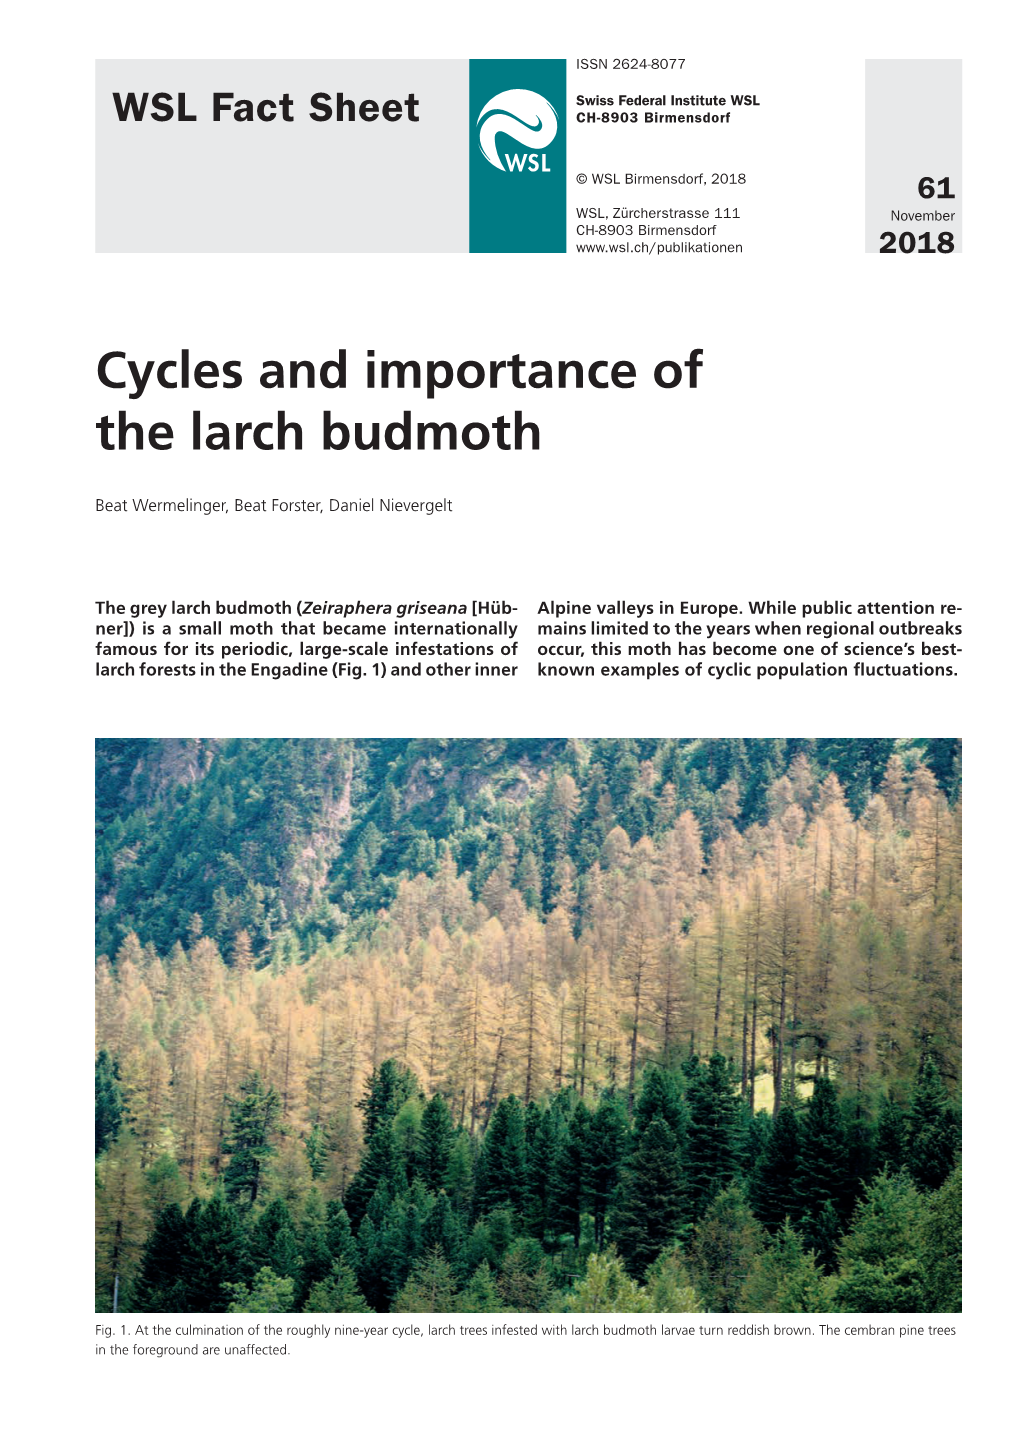 Cycles and Importance of the Larch Budmoth